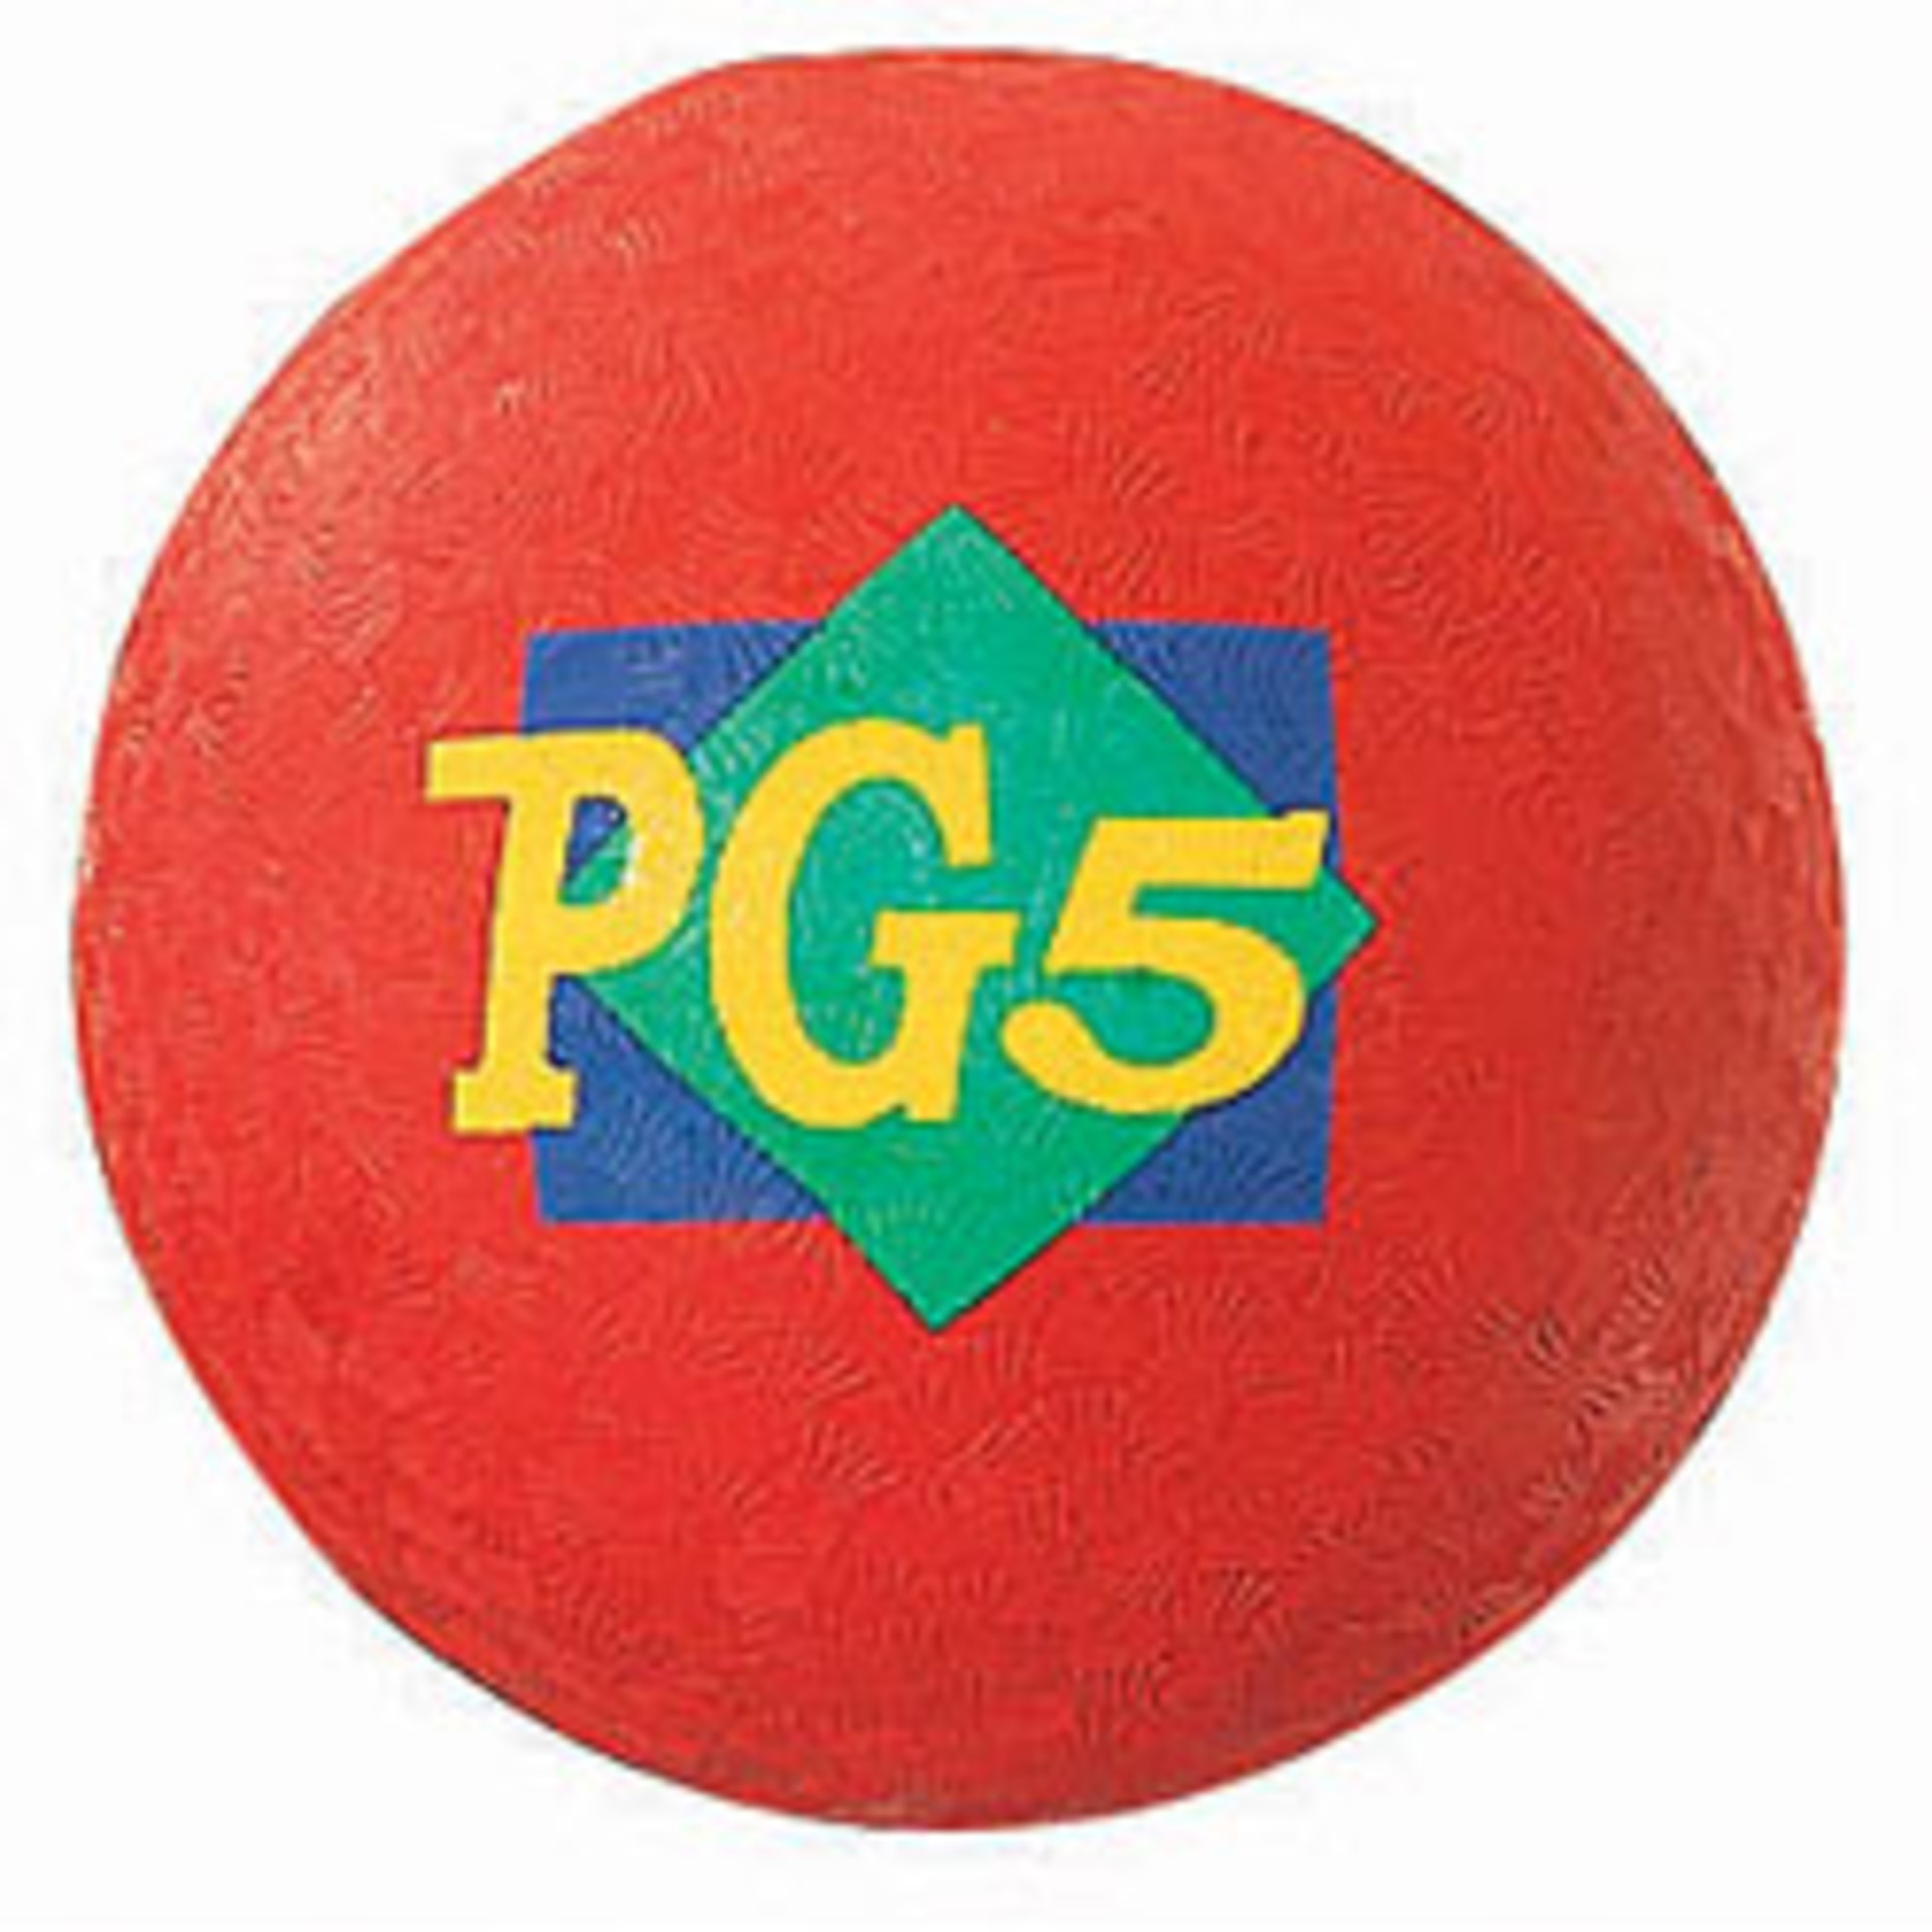 Dick Martin Sports Martin Sports Physical Education Playground Ball 10" MASPG10R - image 1 of 2